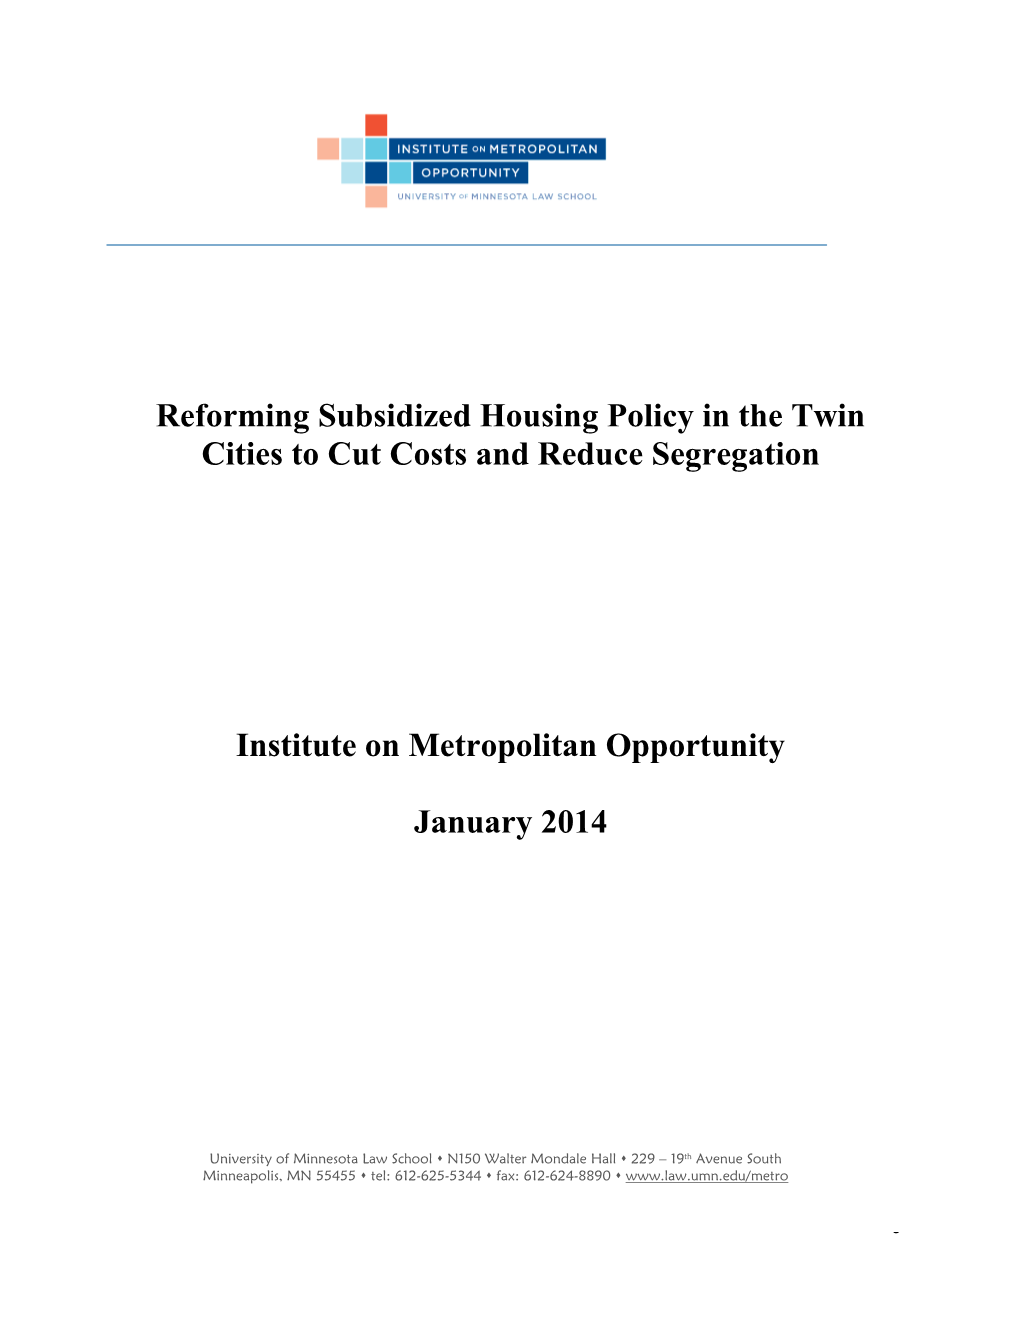 Reforming Subsidized Housing Policy in the Twin Cities to Cut Costs and Reduce Segregation Institute on Metropolitan Opportunity